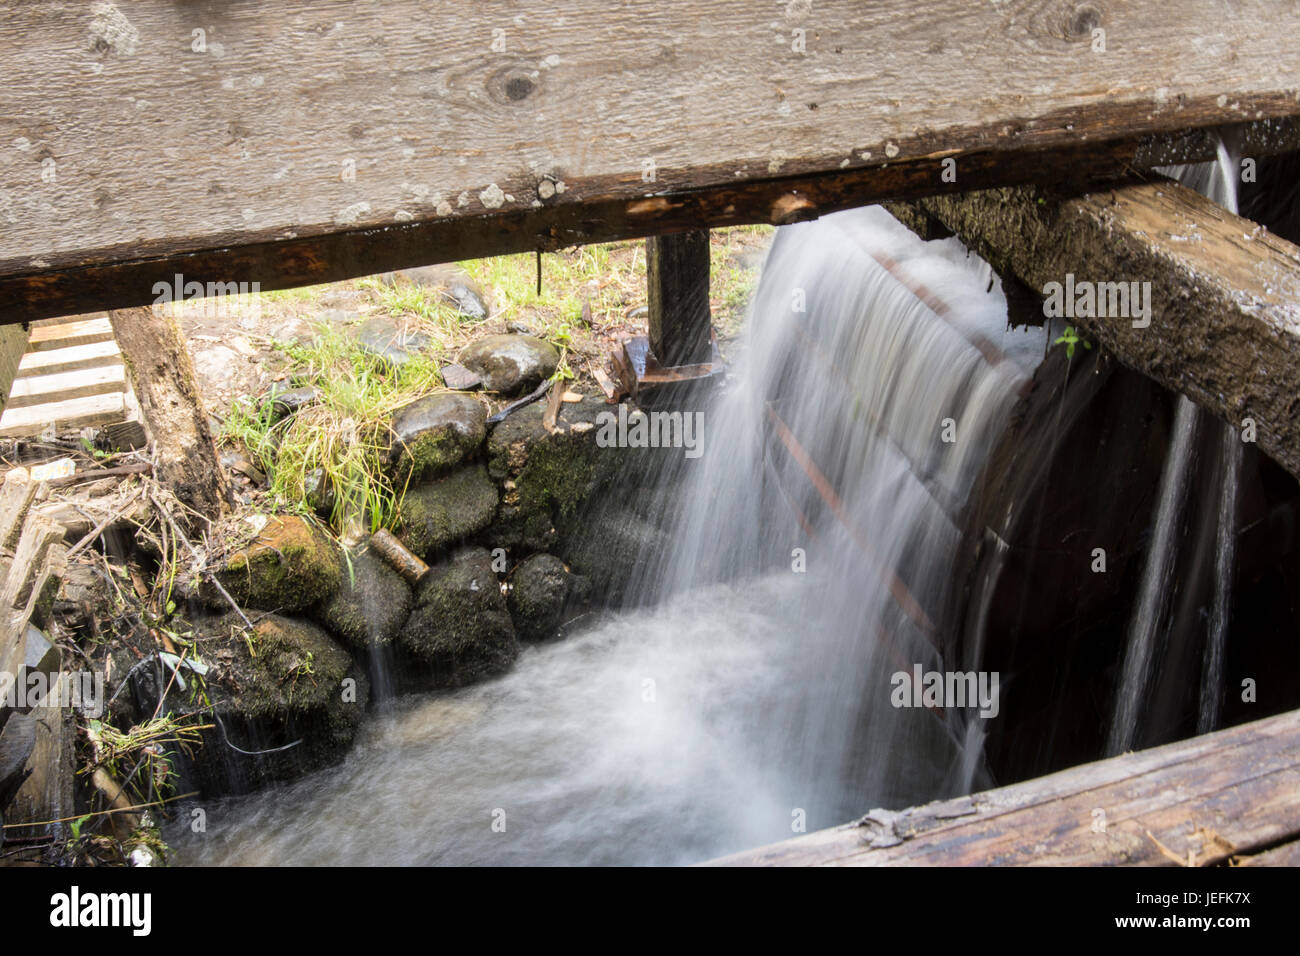 A traditional carpet washing machine in a river in the Maramures region Stock Photo